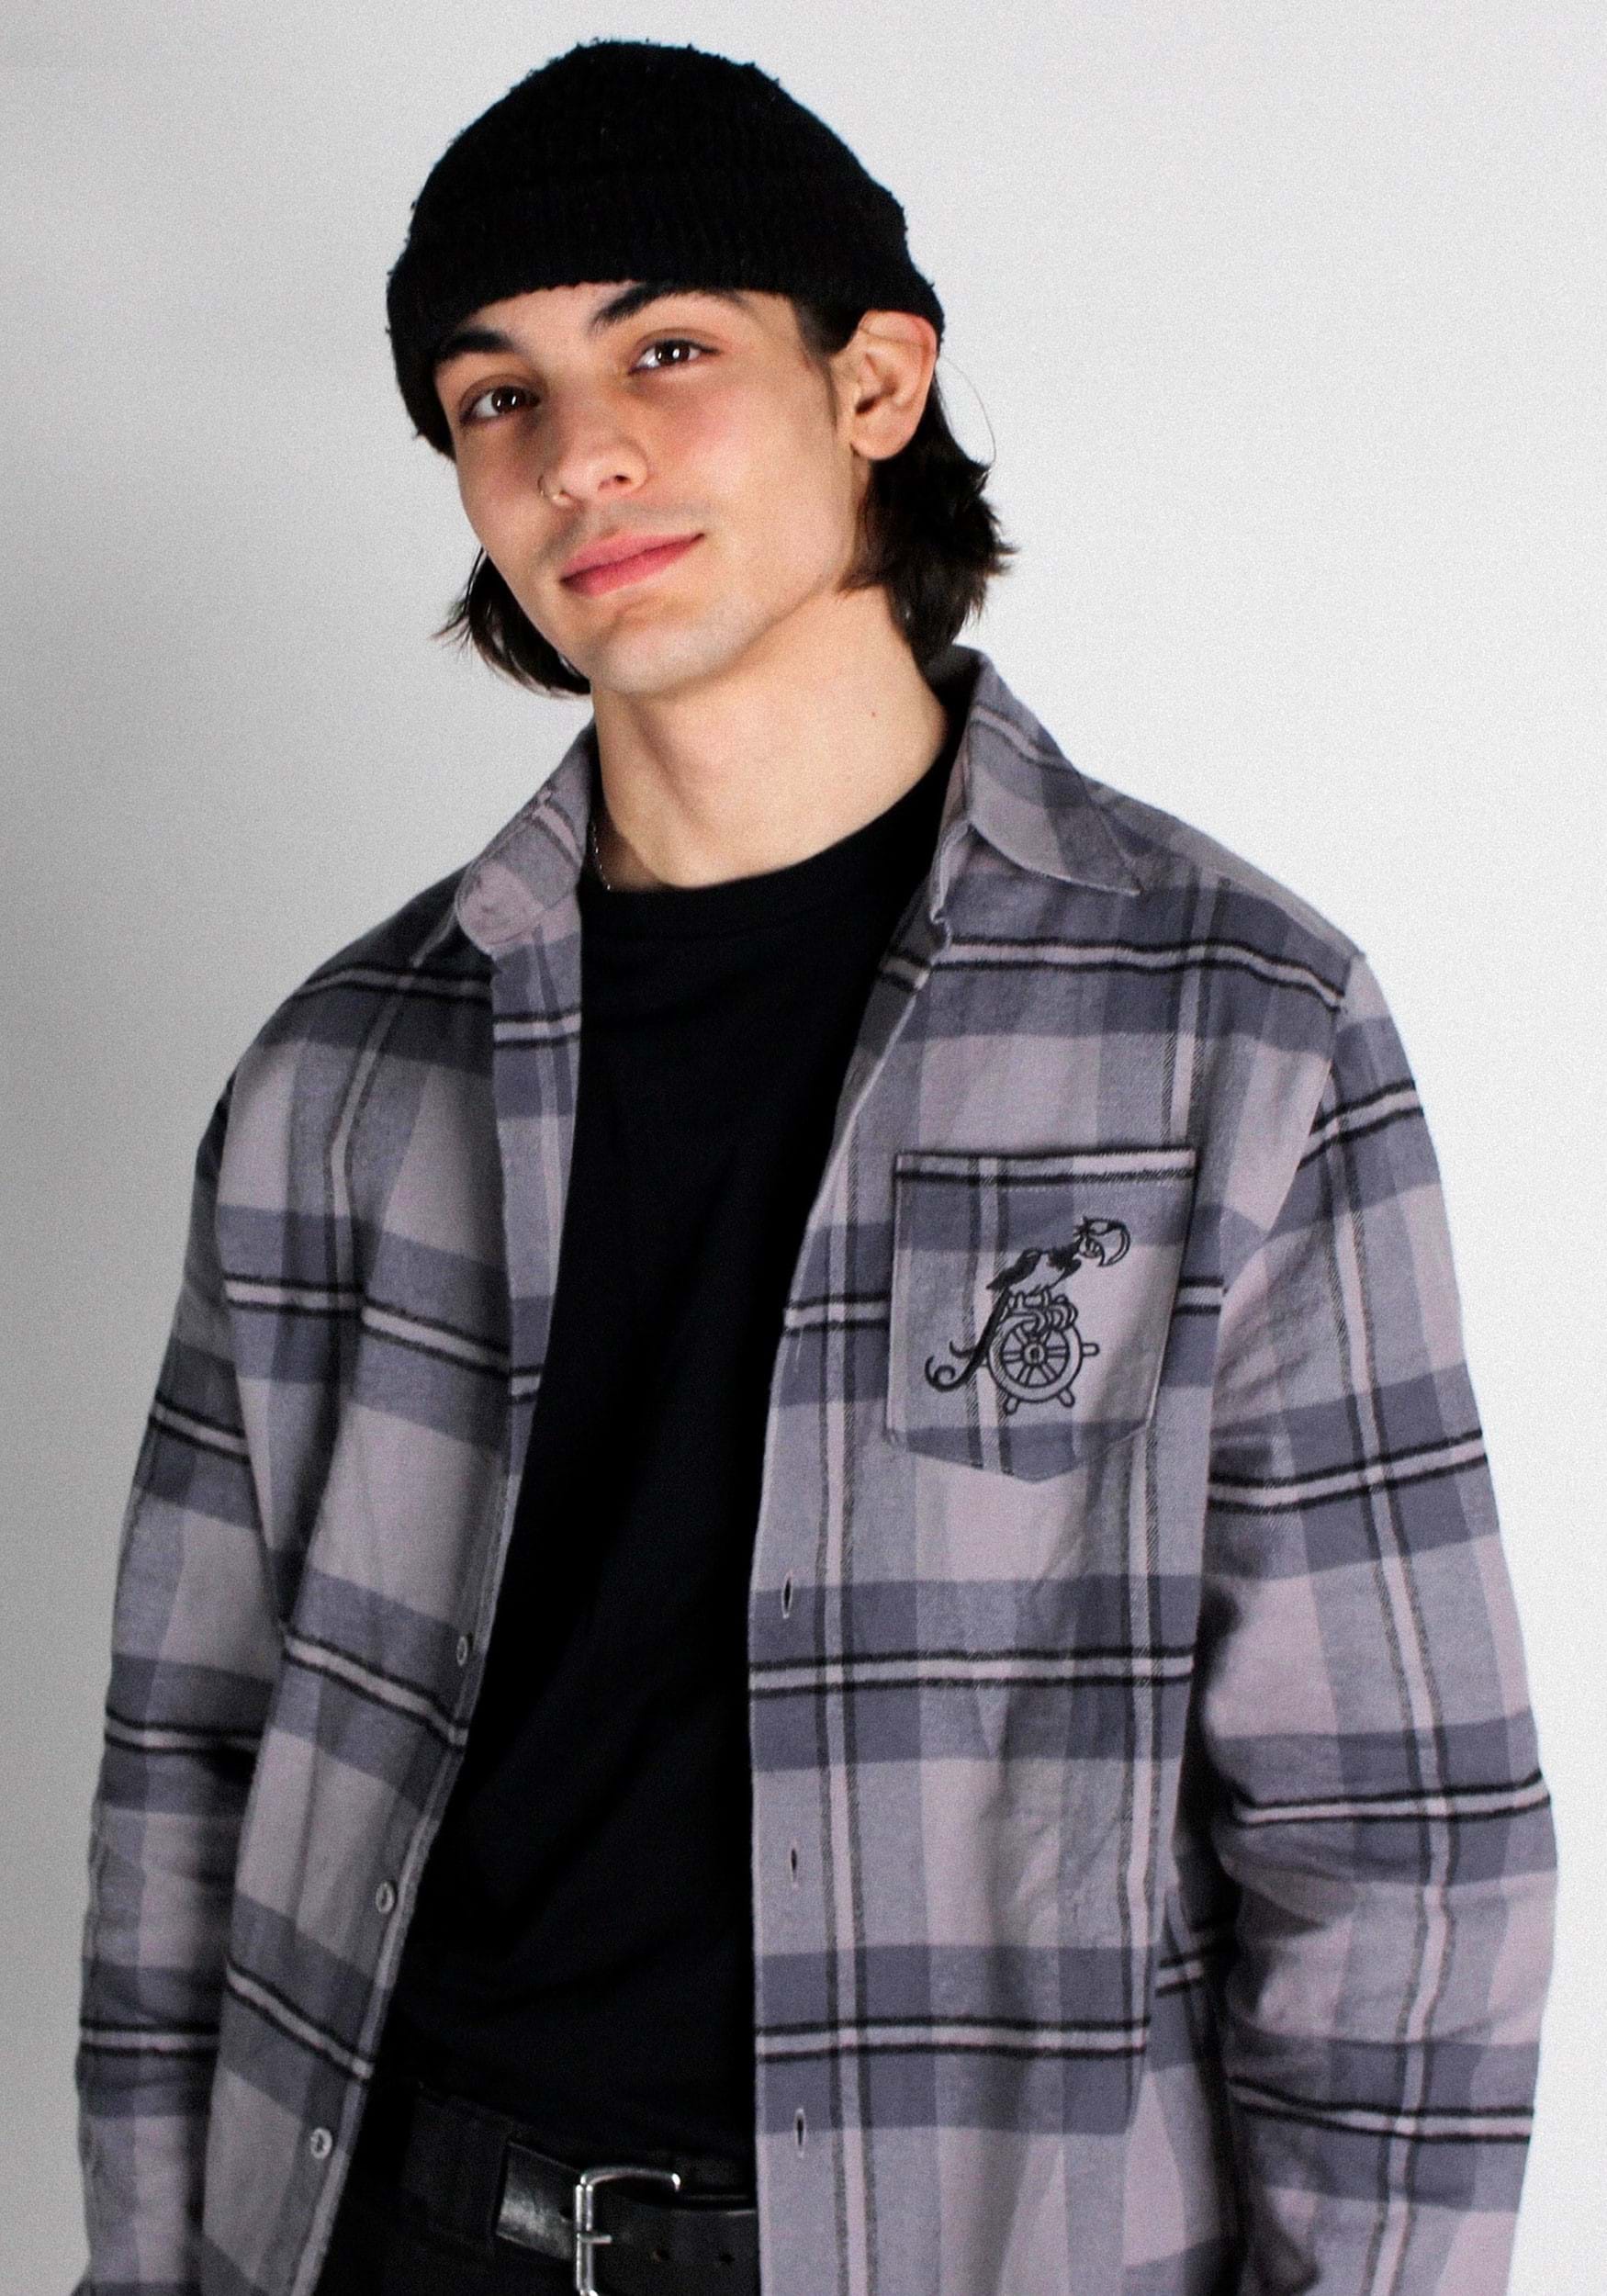 Cakeworthy Steamboat Willie Adult Flannel